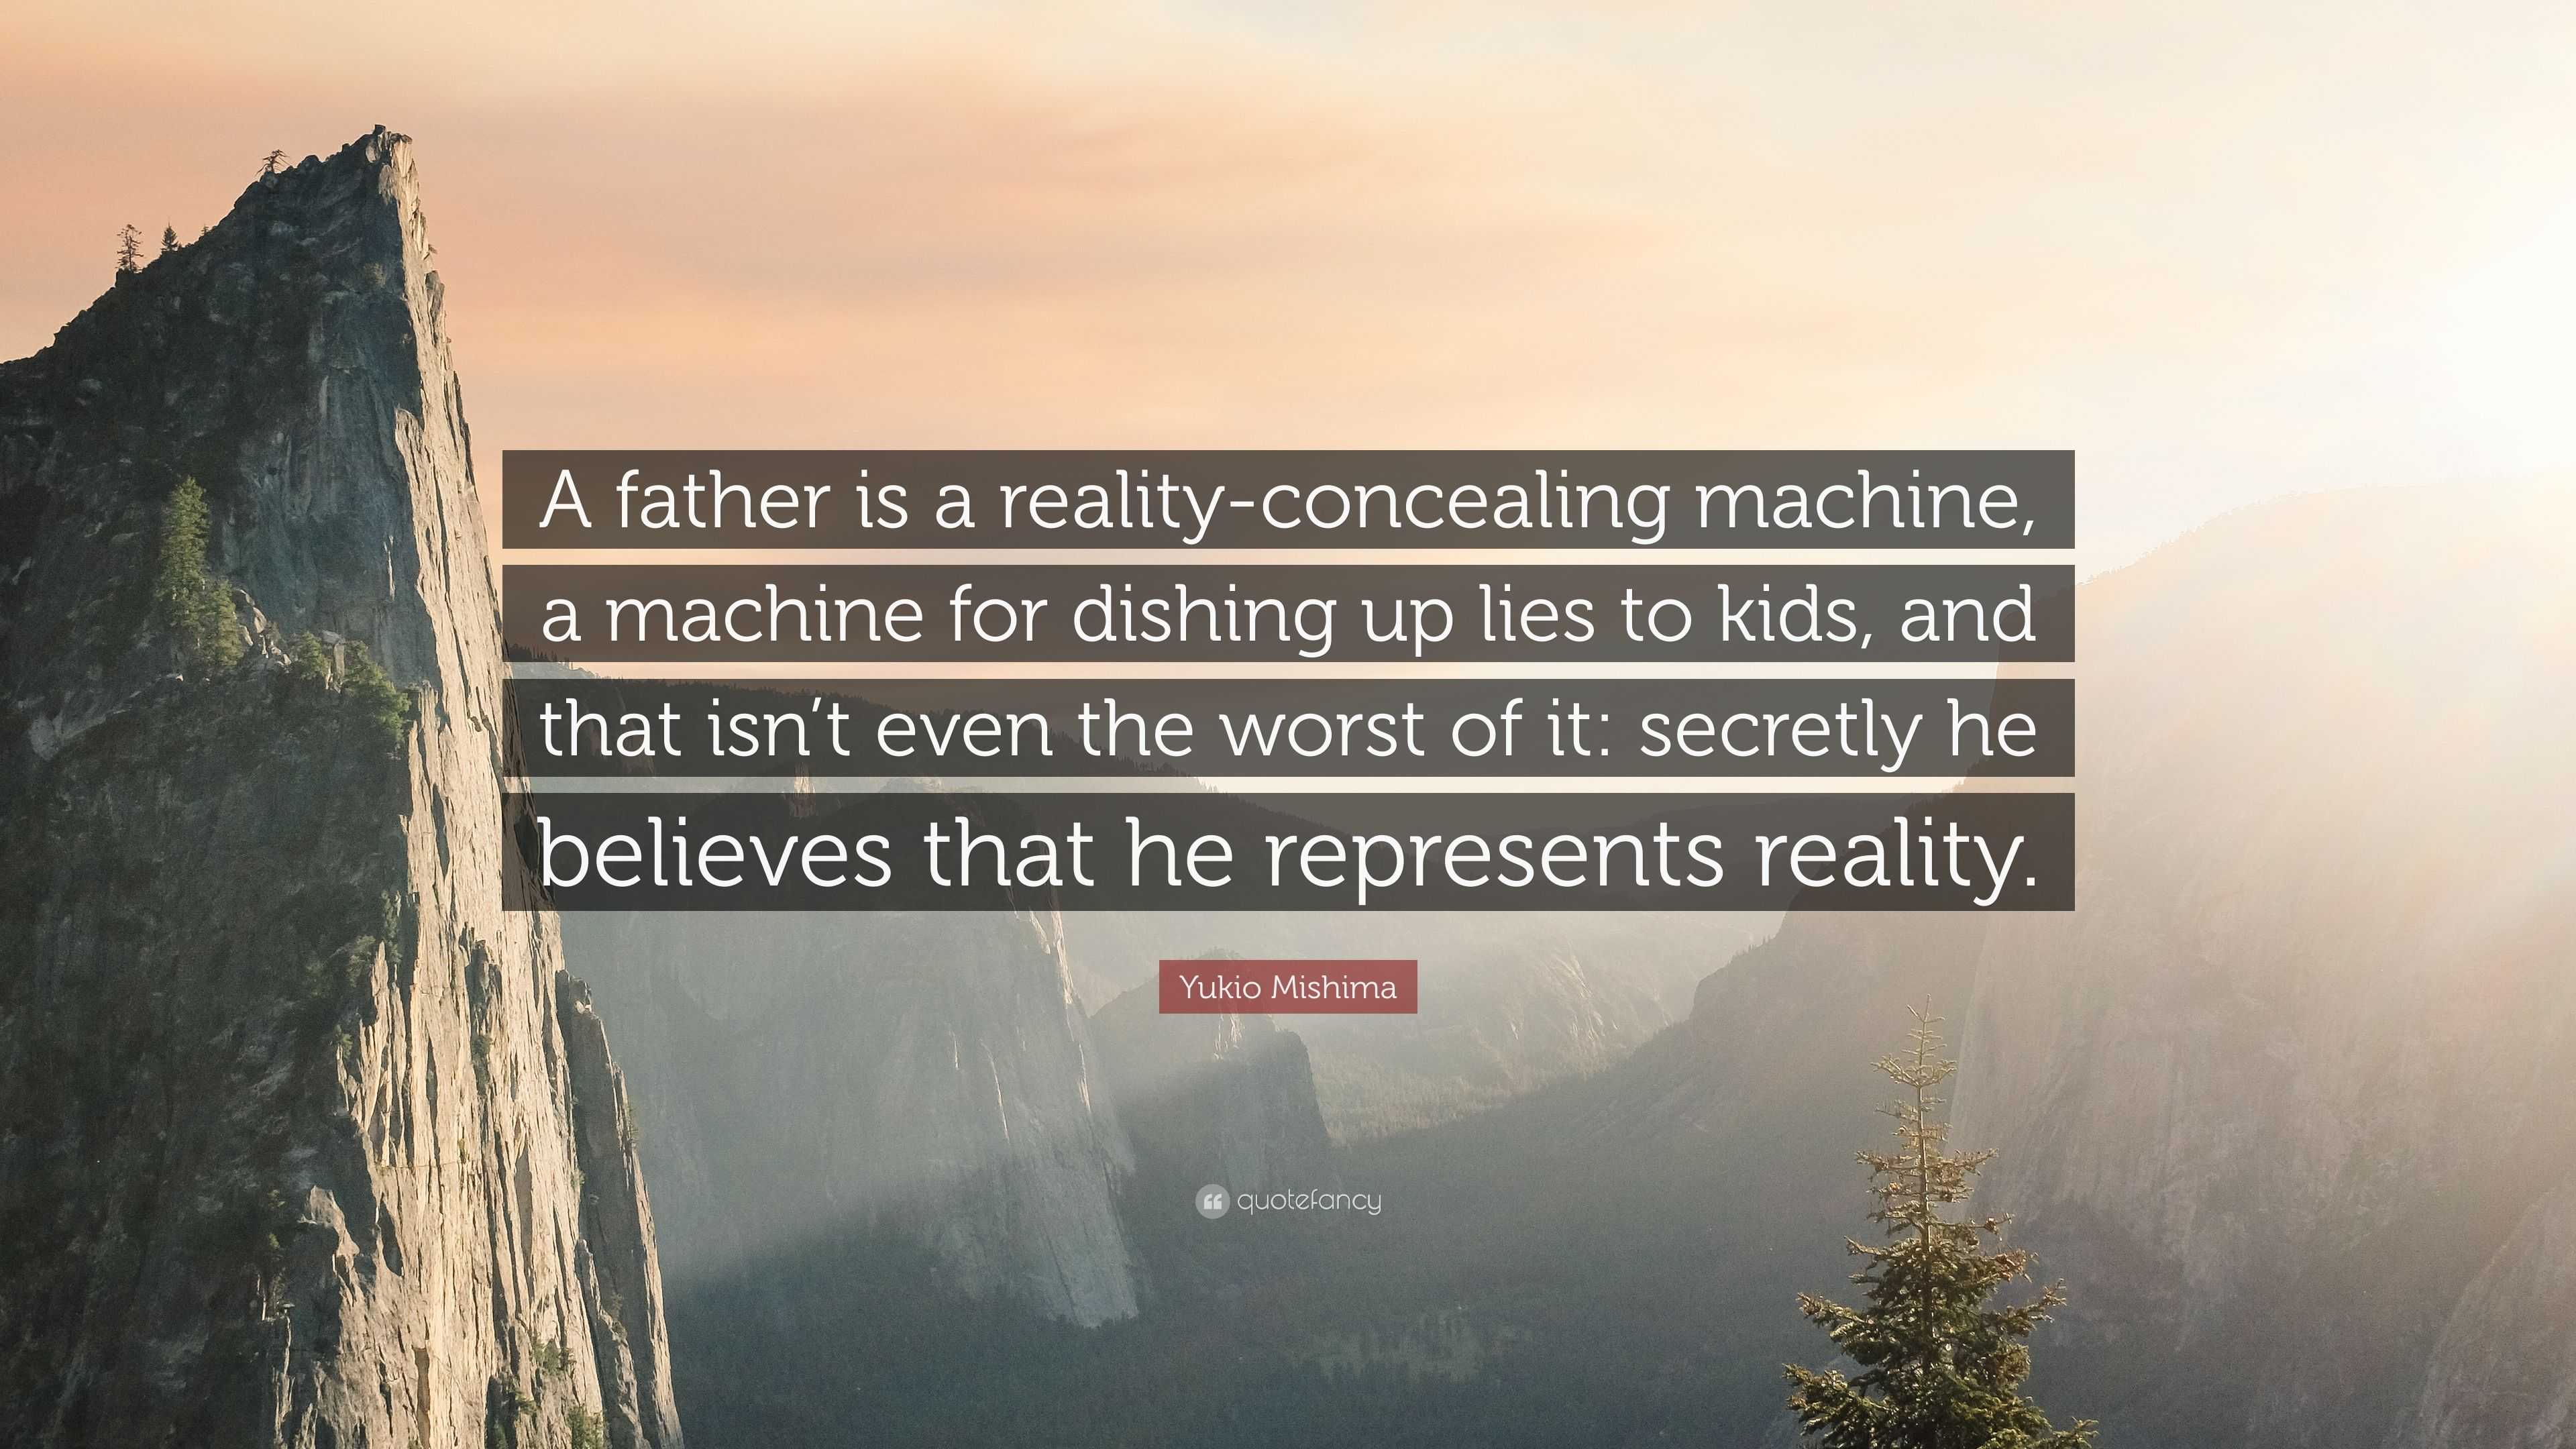 https://quotefancy.com/media/wallpaper/3840x2160/3774601-Yukio-Mishima-Quote-A-father-is-a-reality-concealing-machine-a.jpg